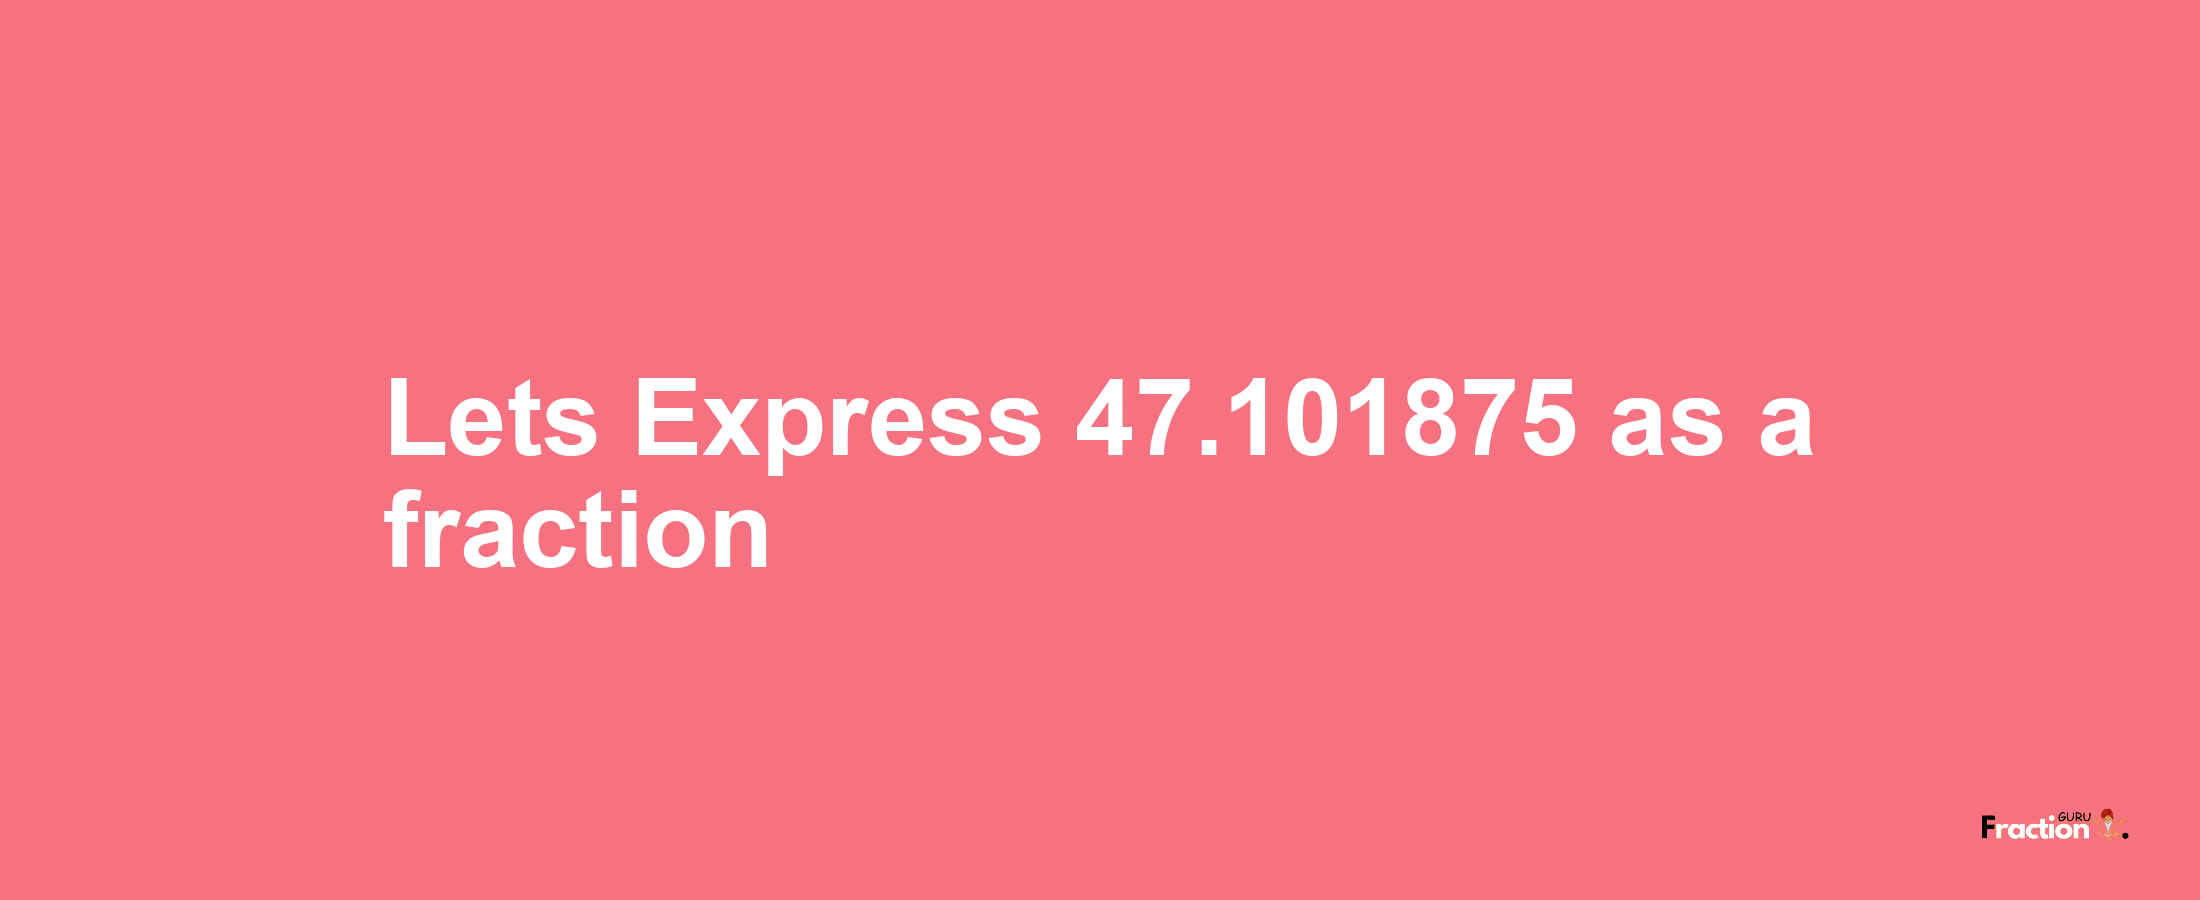 Lets Express 47.101875 as afraction